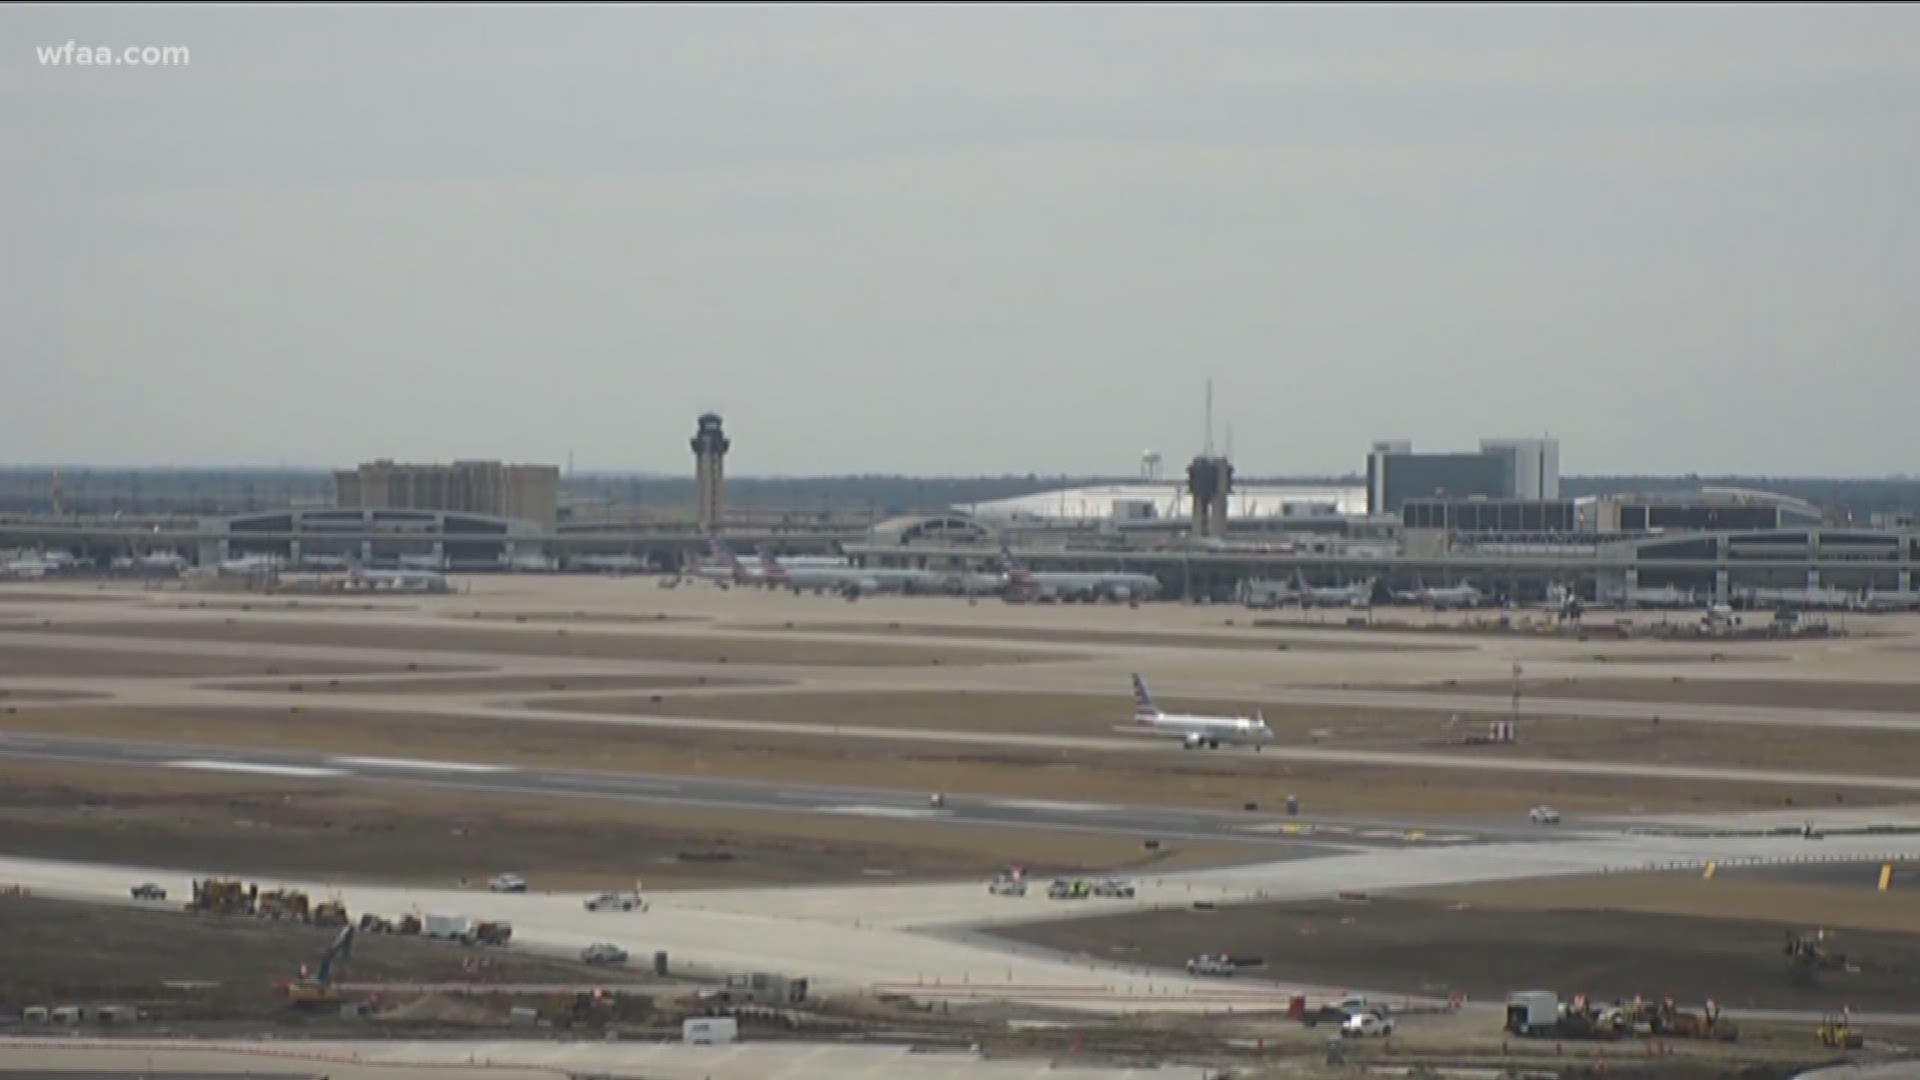 Reports of a smoke in a control center led to evacuations and a ground stop at both airports.